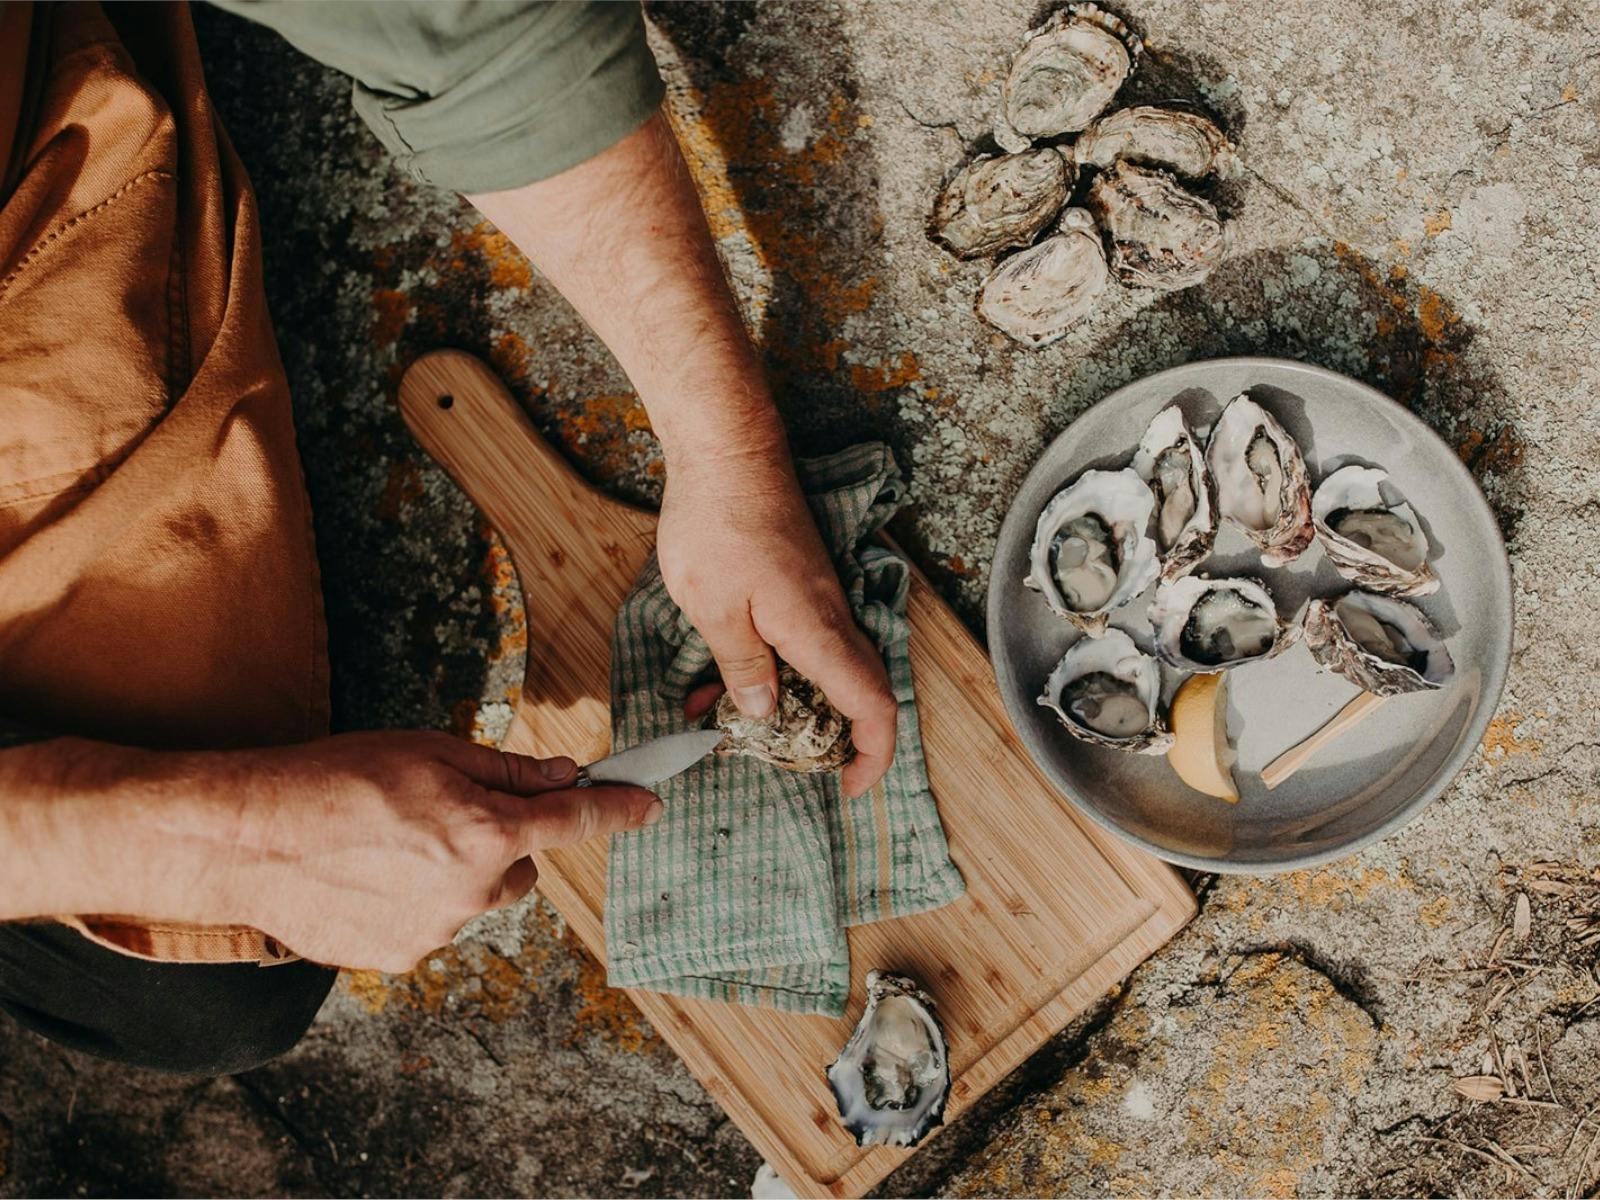 Hands shucking oyster with knife on chopping board. Bowl of fresh oysters and lemon next to board.